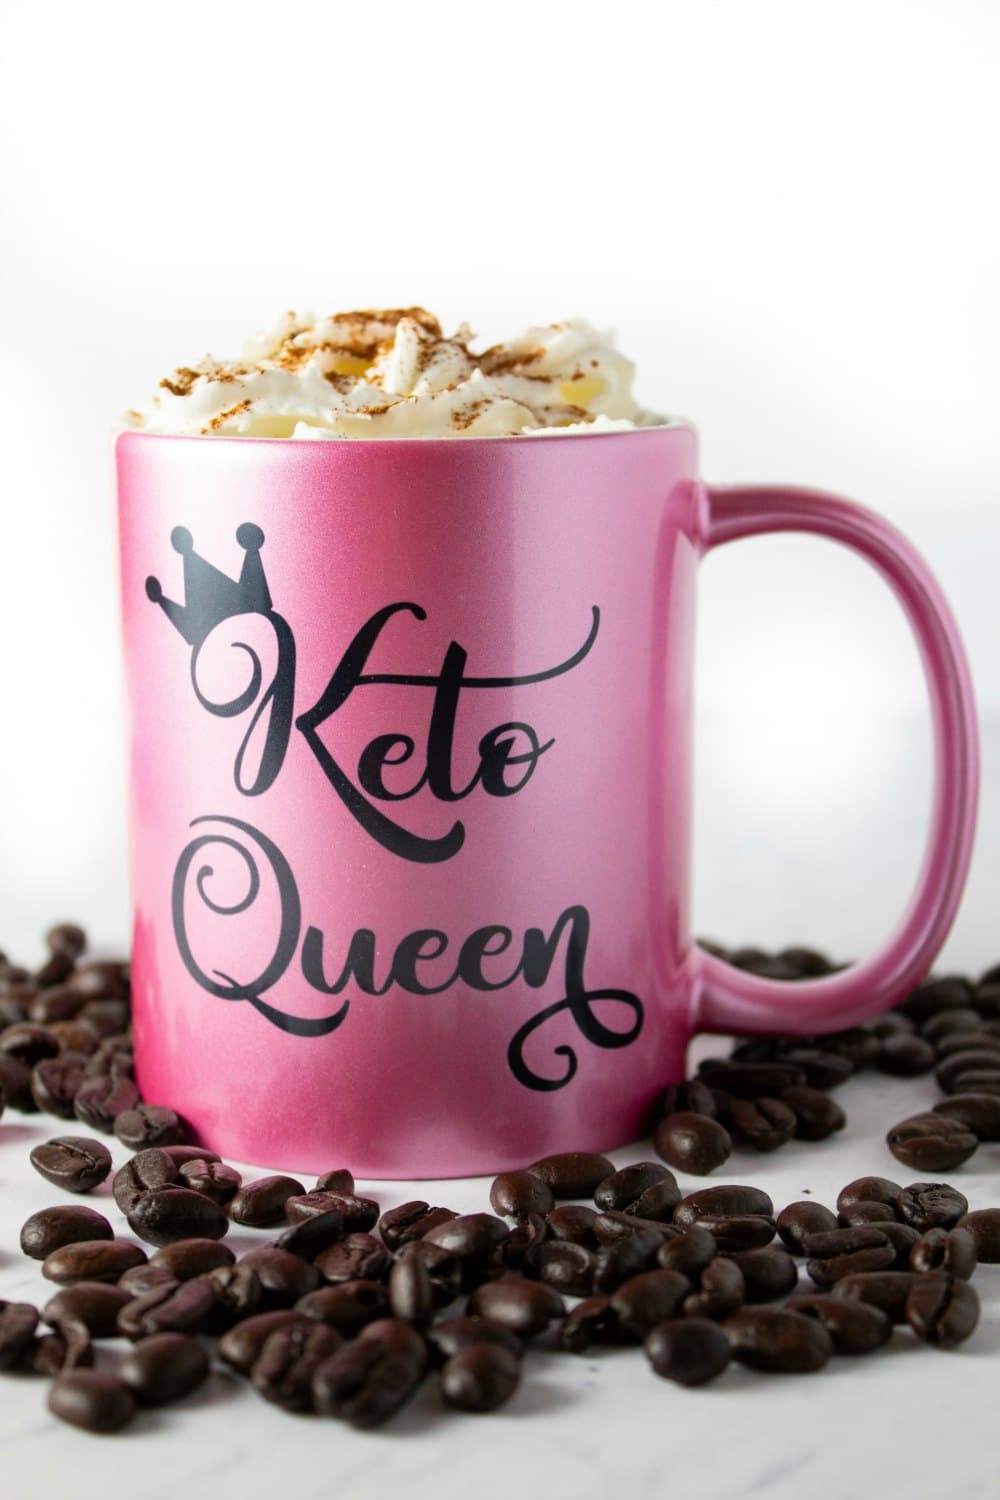 coffee in keto queen cup with whipped cream on top